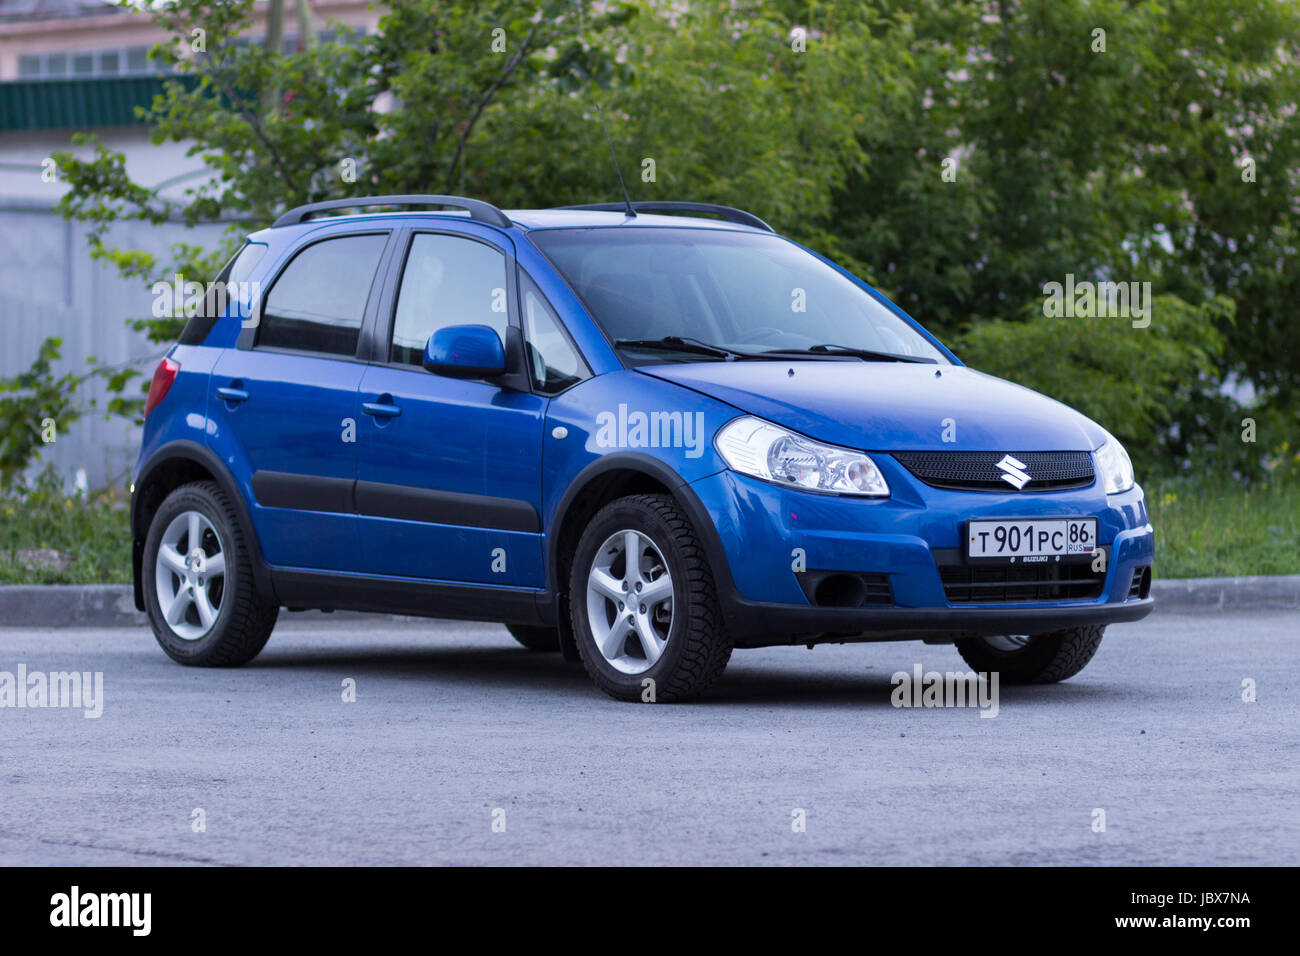 Ekaterinburg, Russia June 11, 2017 - Suzuki SX4 car of blue color stands on the asphalt parking lot in the evening Stock Photo